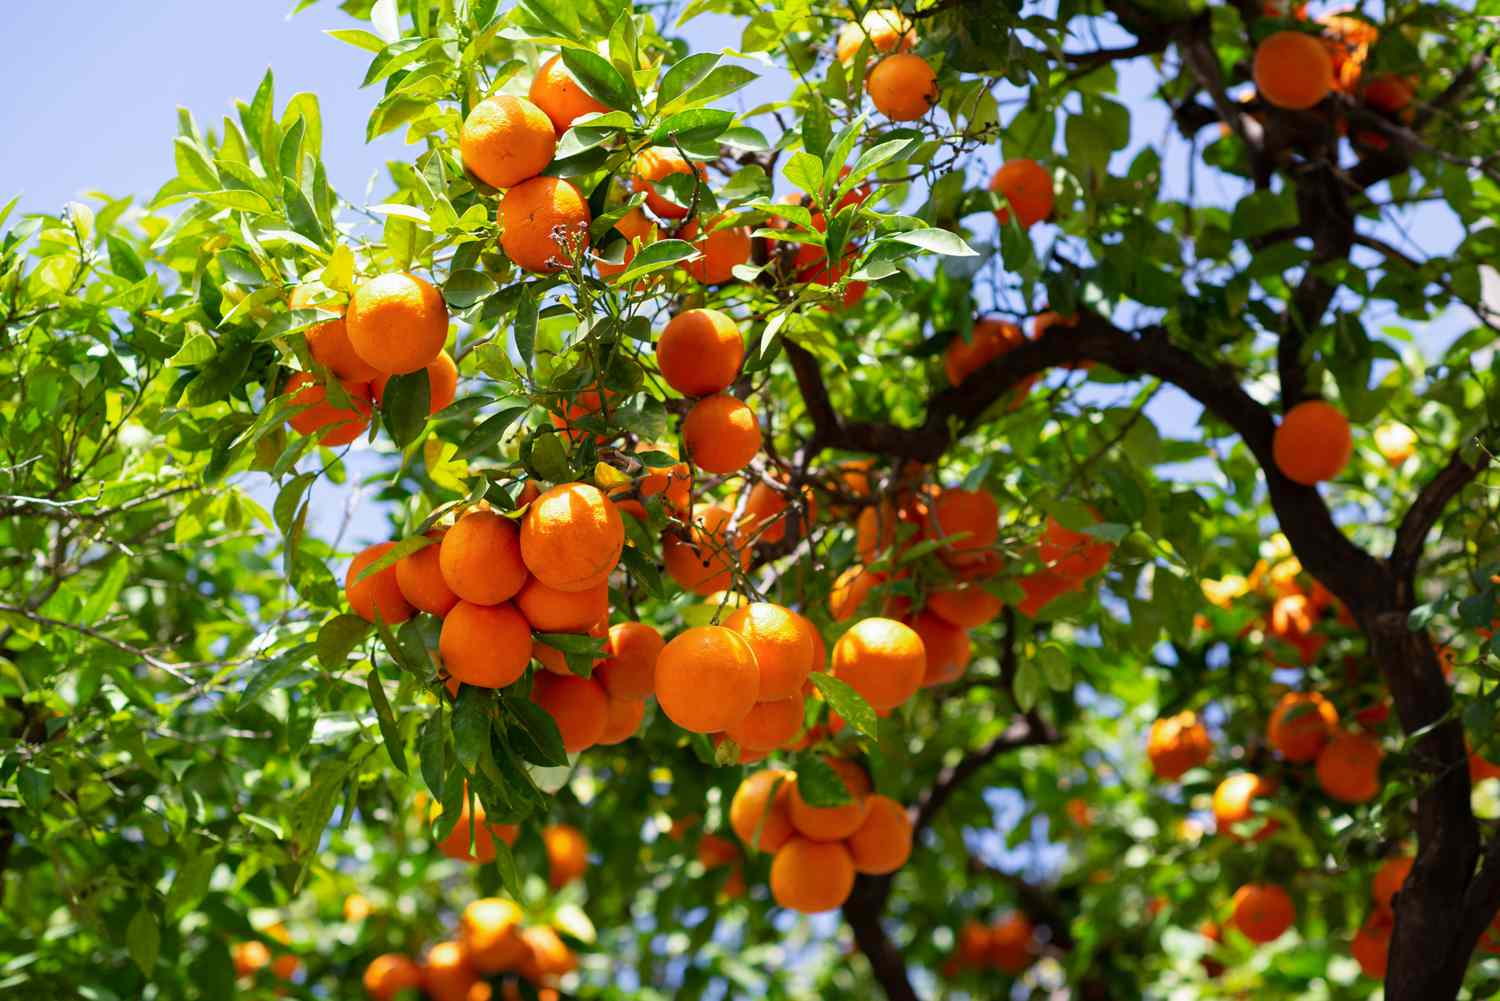 How To Grow An Orange Tree From Seed